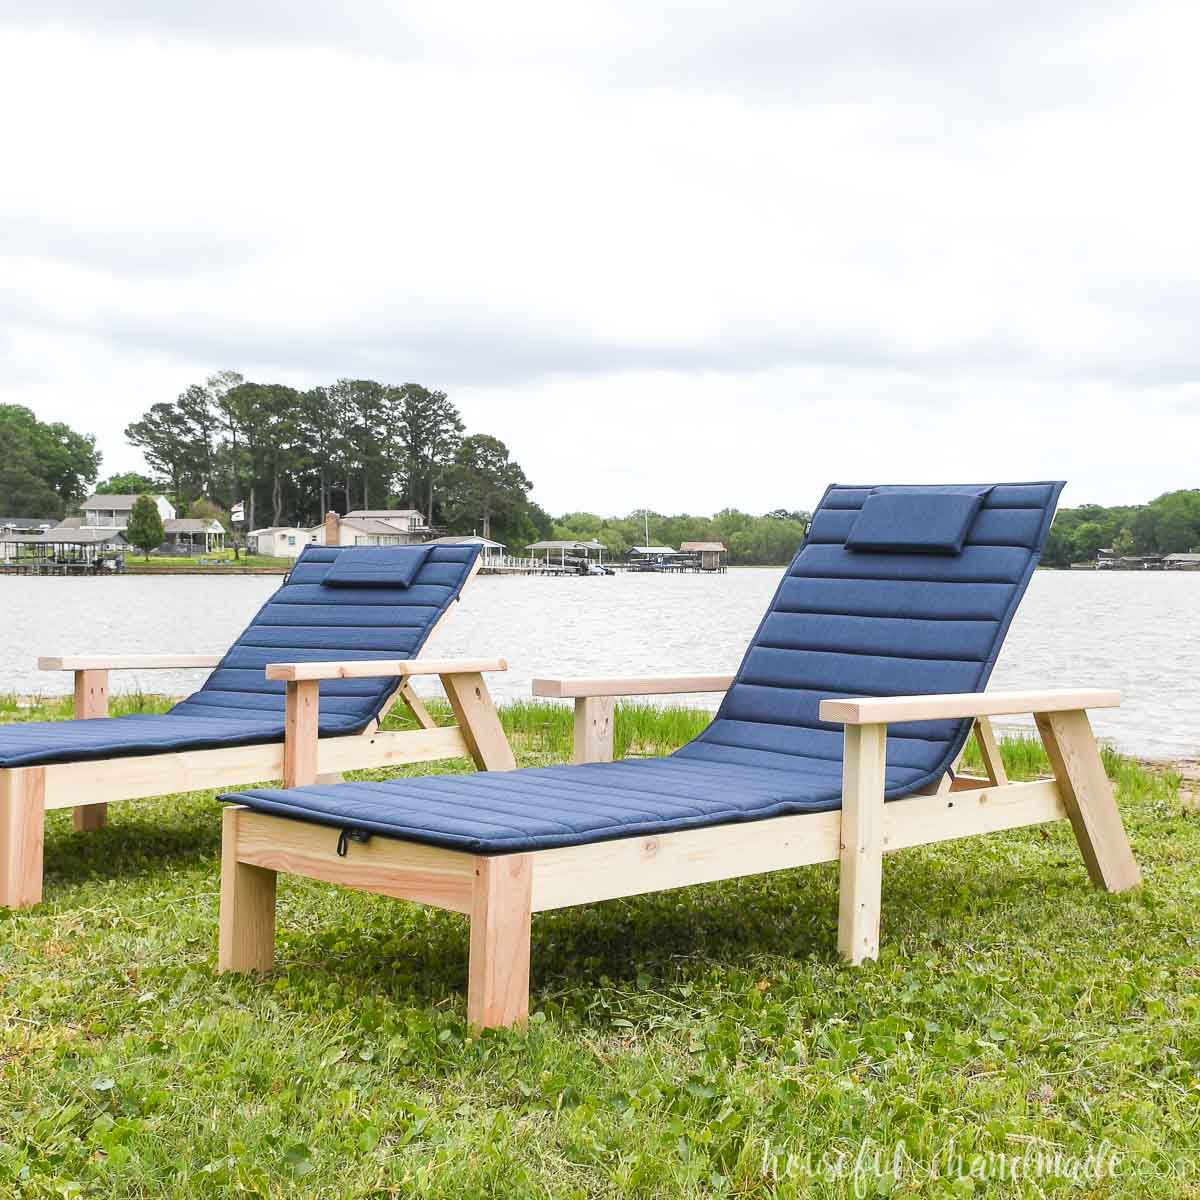 Two wood pool chaise lounge chairs on the grass next to a lake.